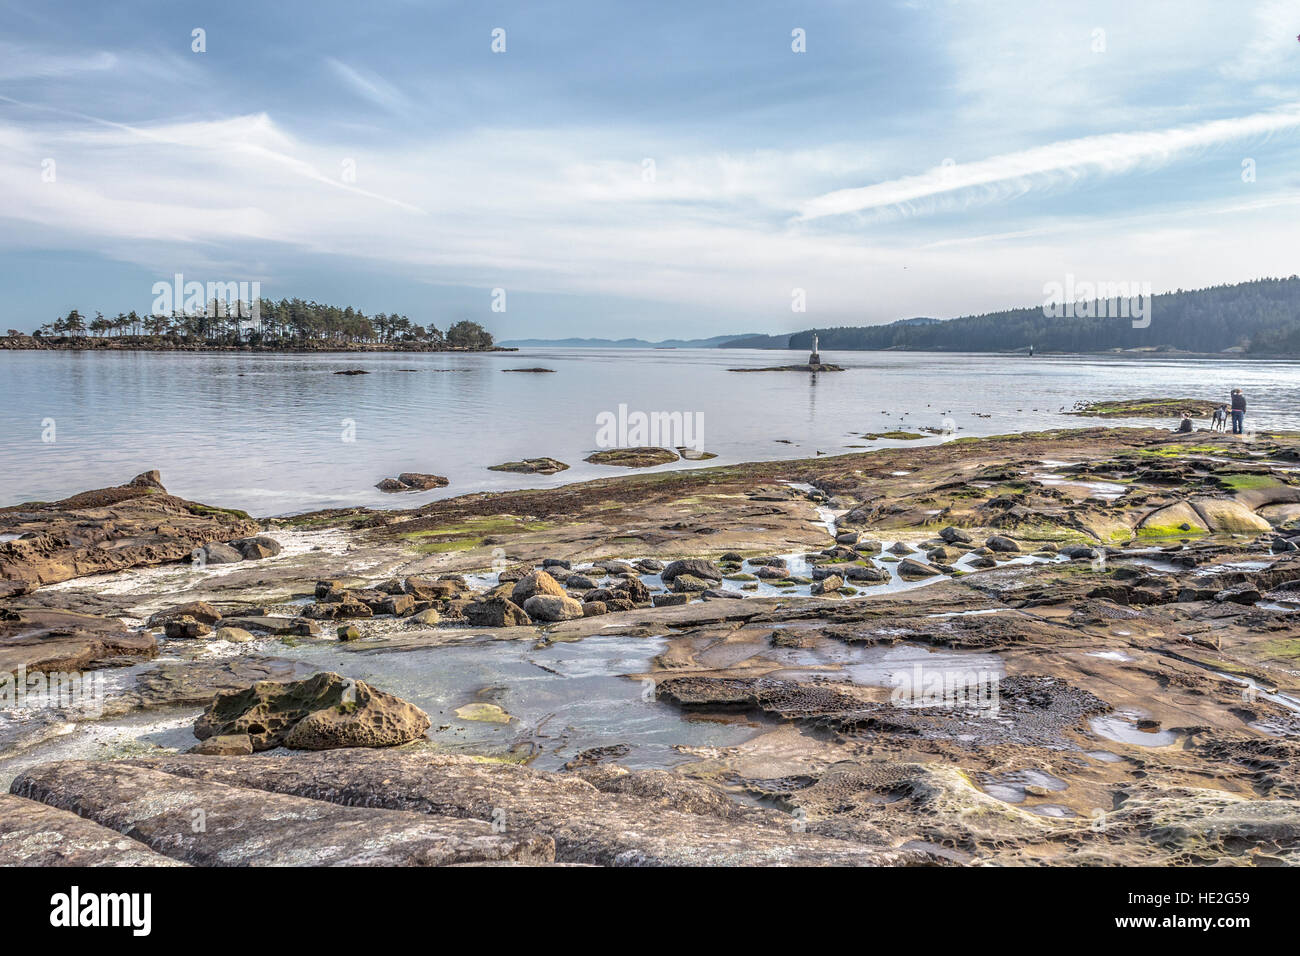 Two people and a dog, on a sunny winter day at a rocky beach at Drumbeg Provincial Park on Gabriola Island, in British Columbia's Gulf Islands. Stock Photo